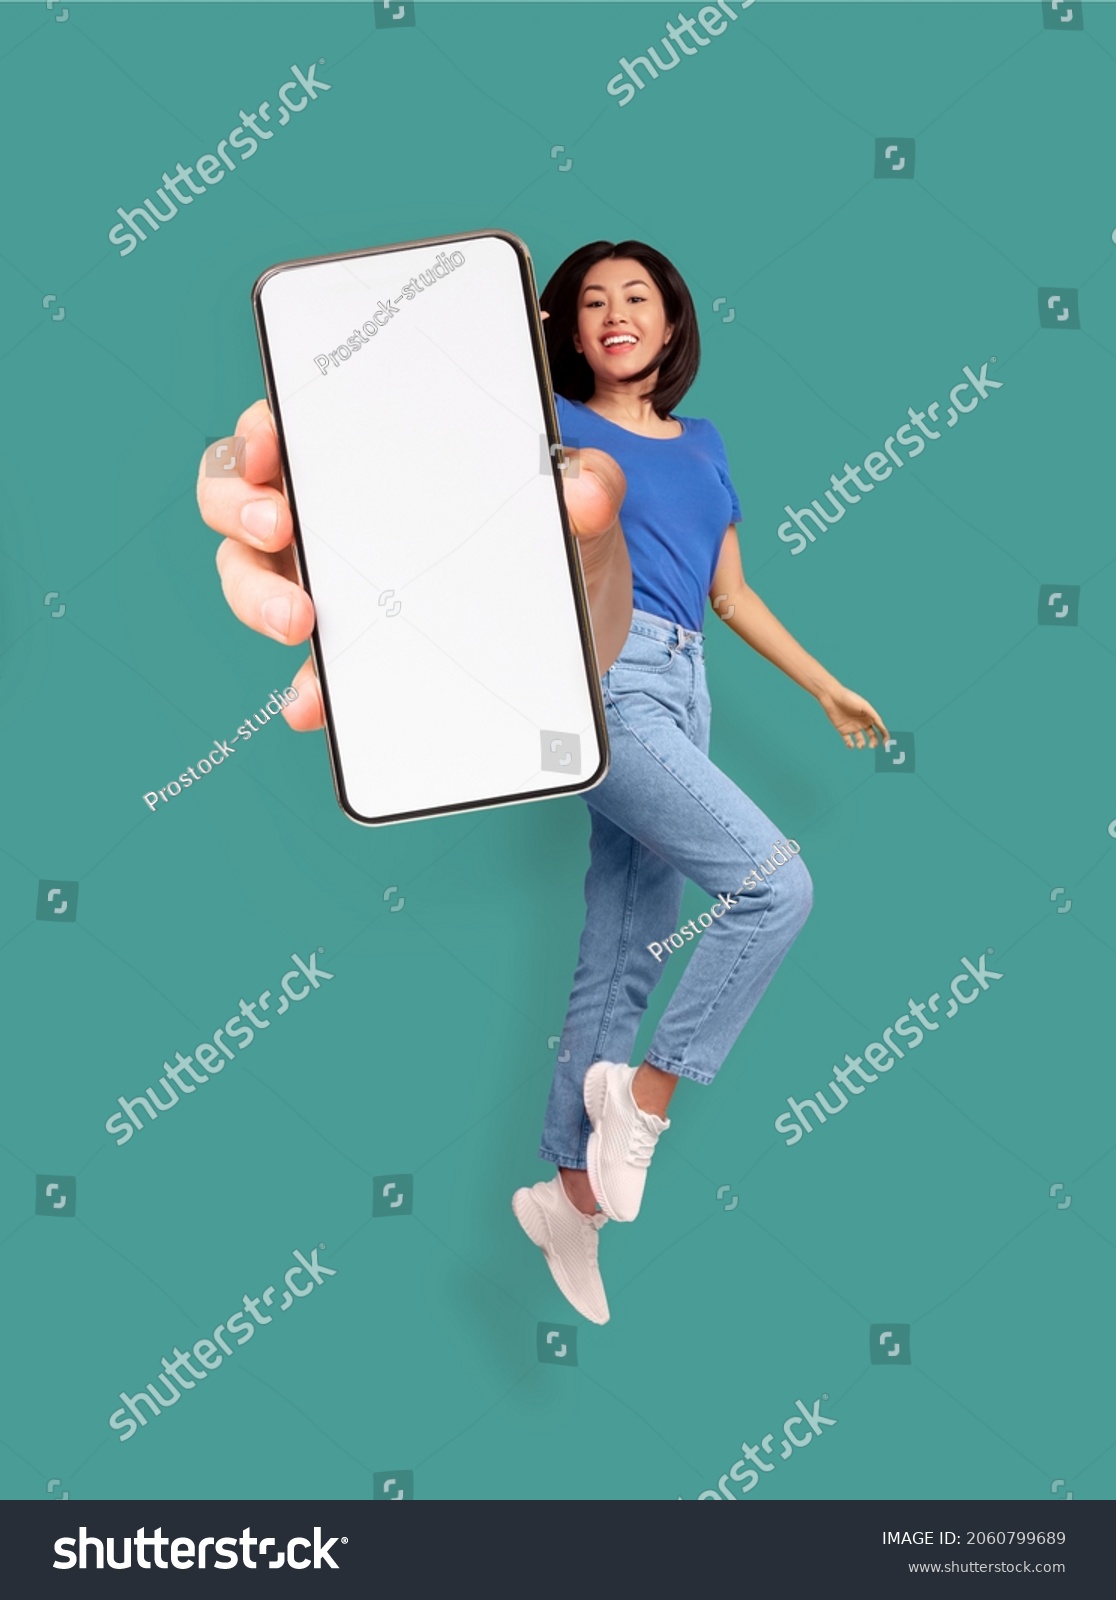 Full length of cheery Asian woman jumping and smiling, showing cellphone with empty space for mobile app or website on screen, turquoise studio background, mockup. Creative collage #2060799689